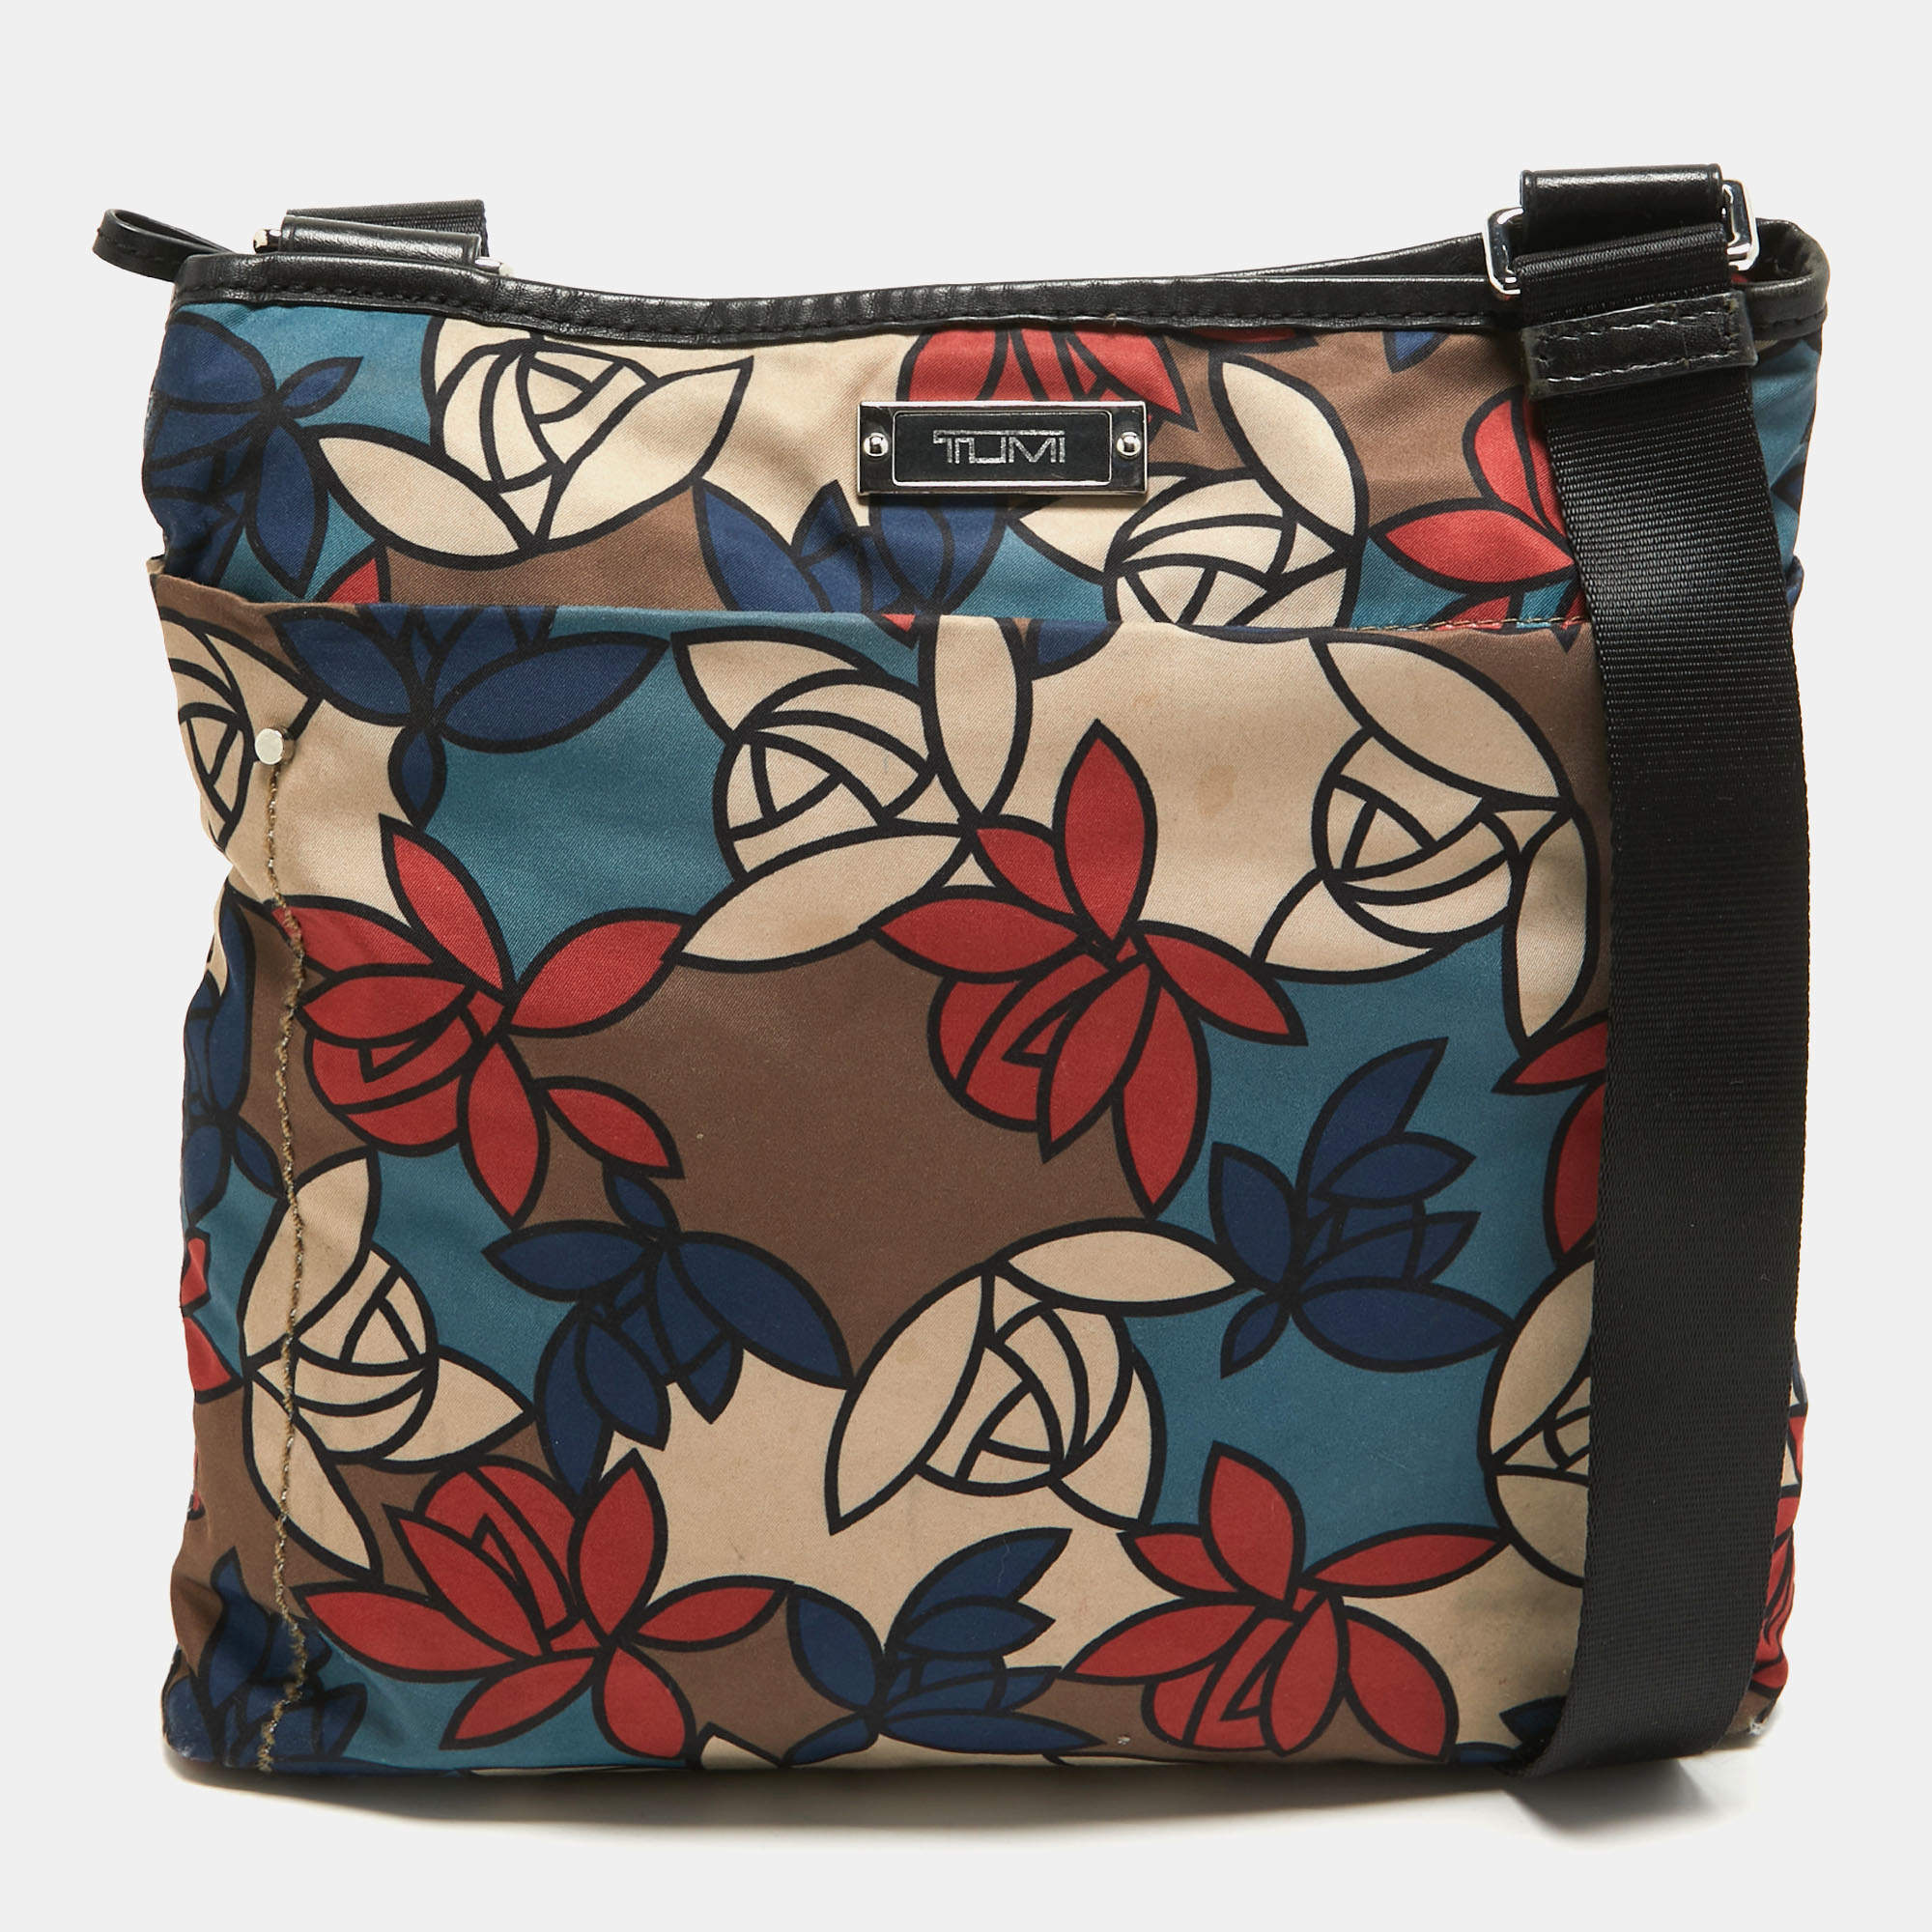 TUMI Multicolor Printed Nylon and Leather Zip Messenger Bag